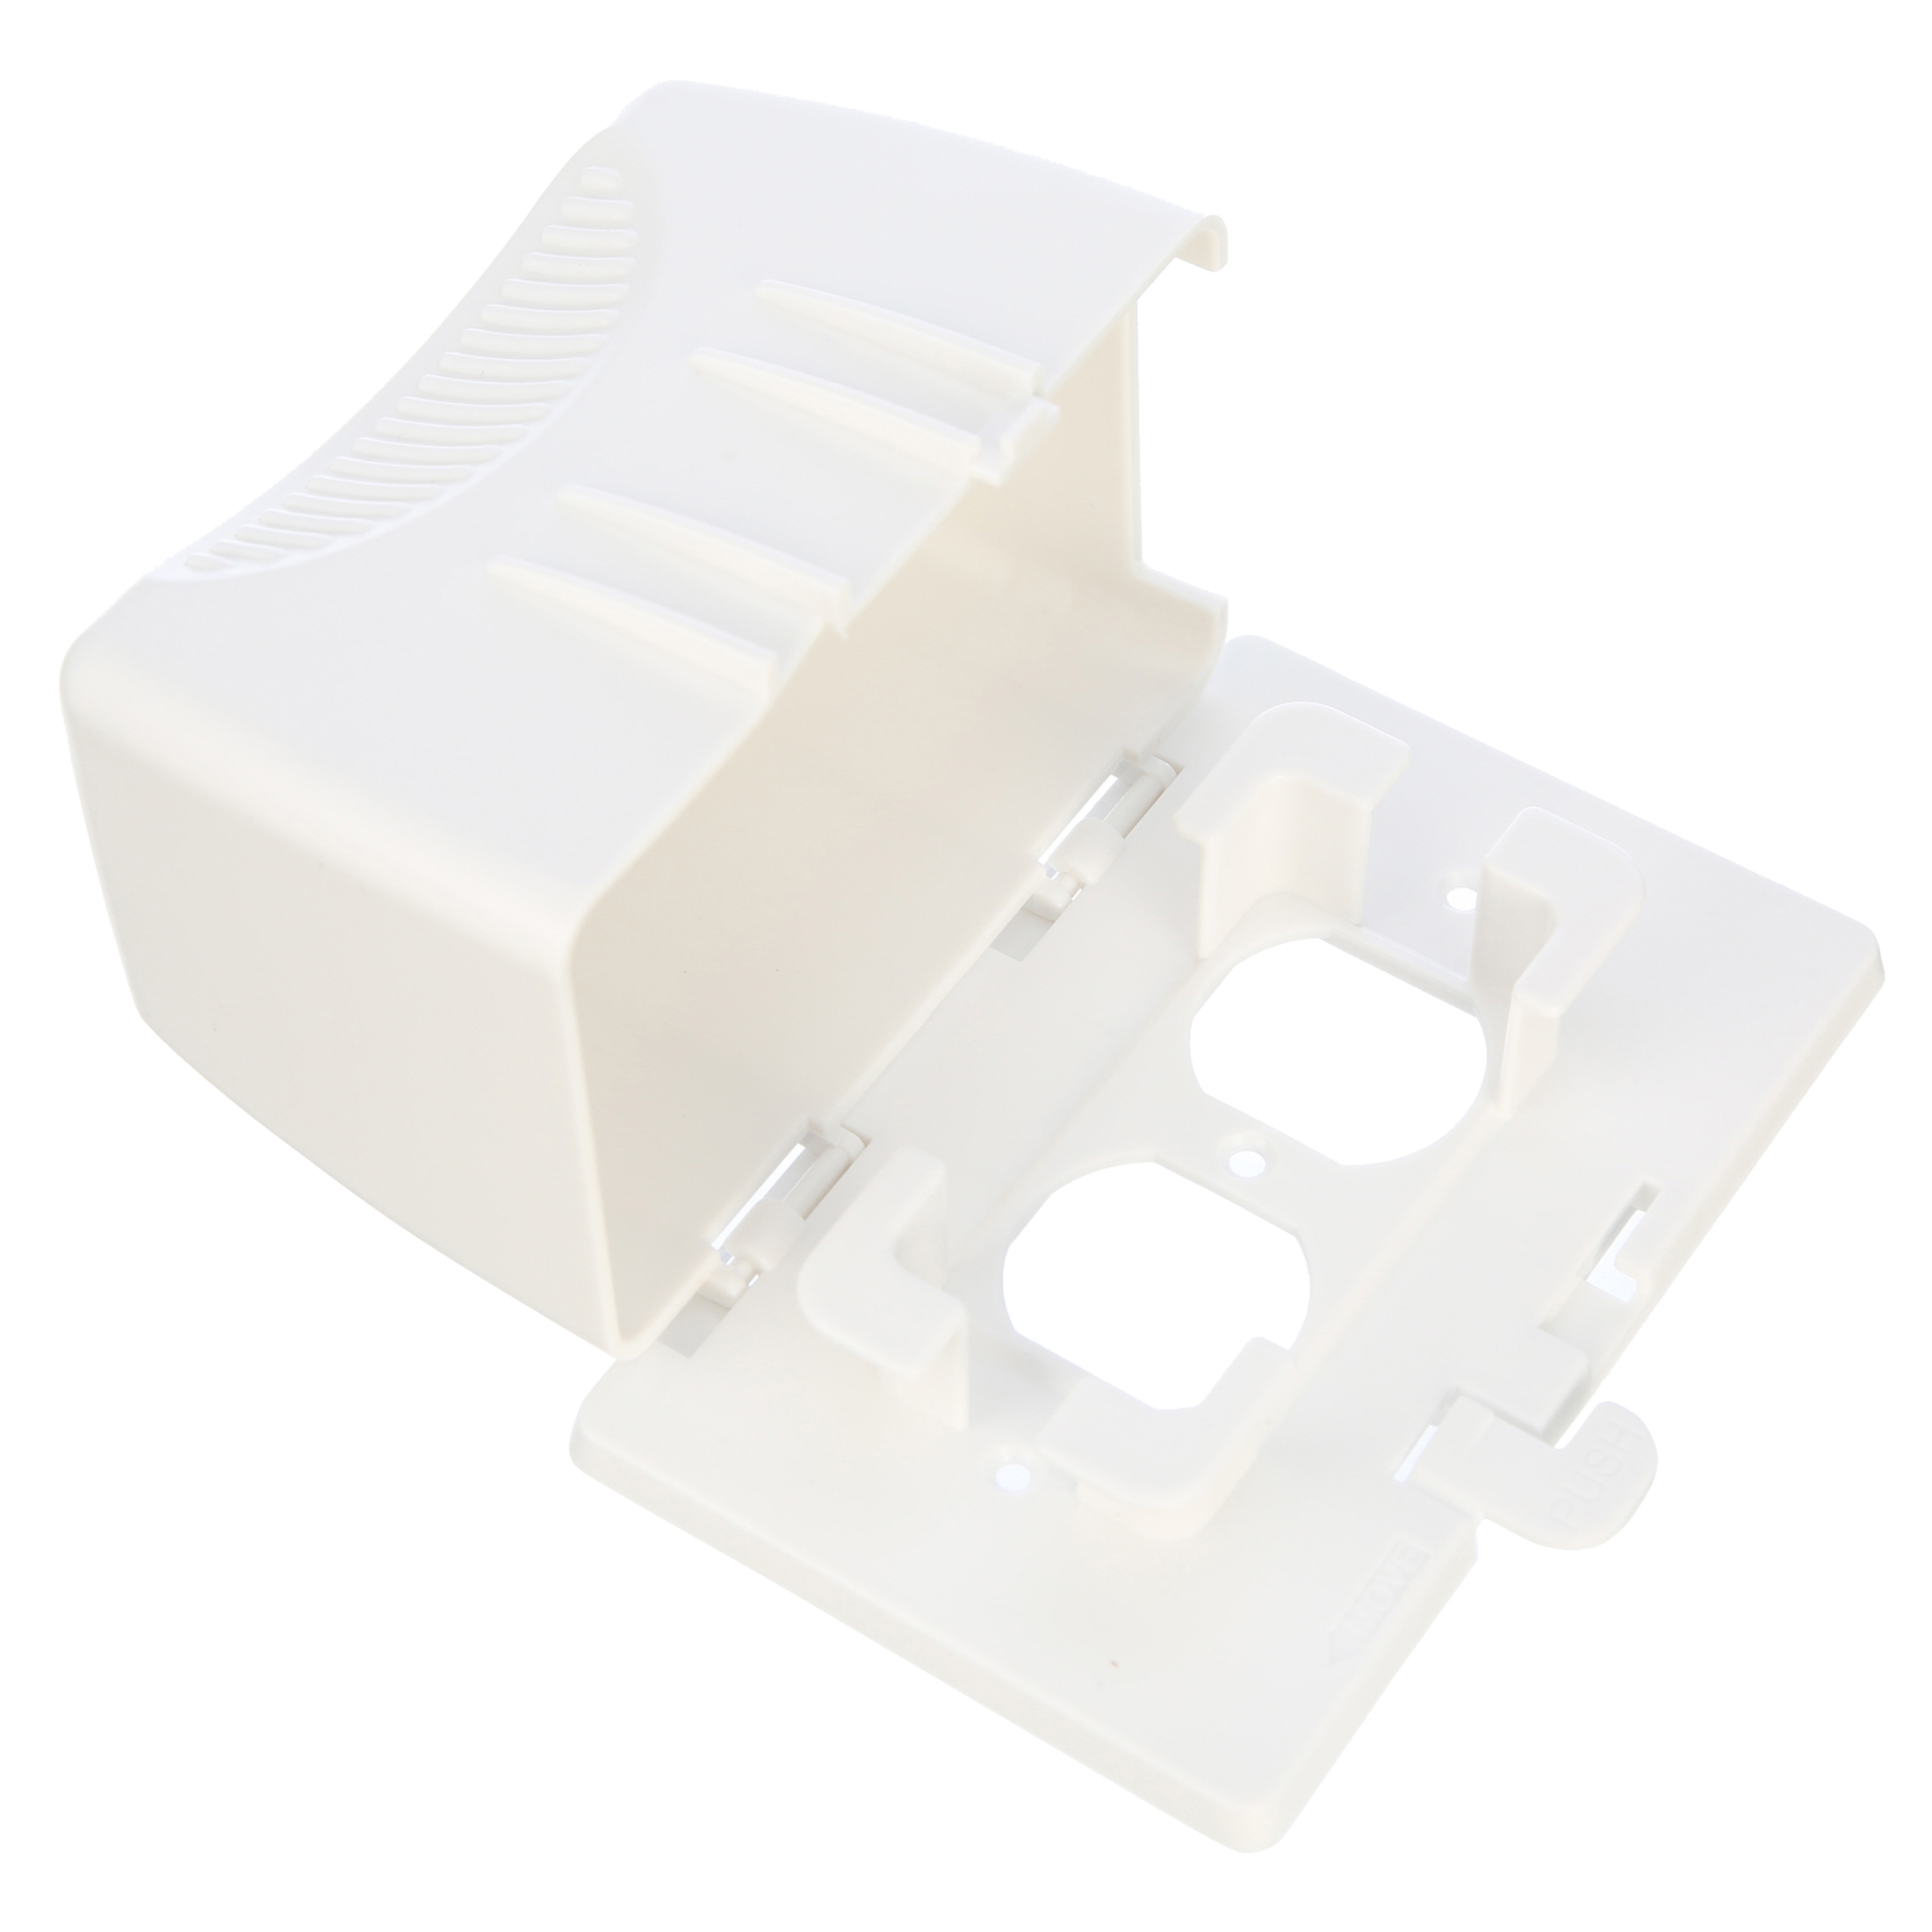 KidCo Child Safety Outlet Plug Cover, White, Plastic - image 3 of 7